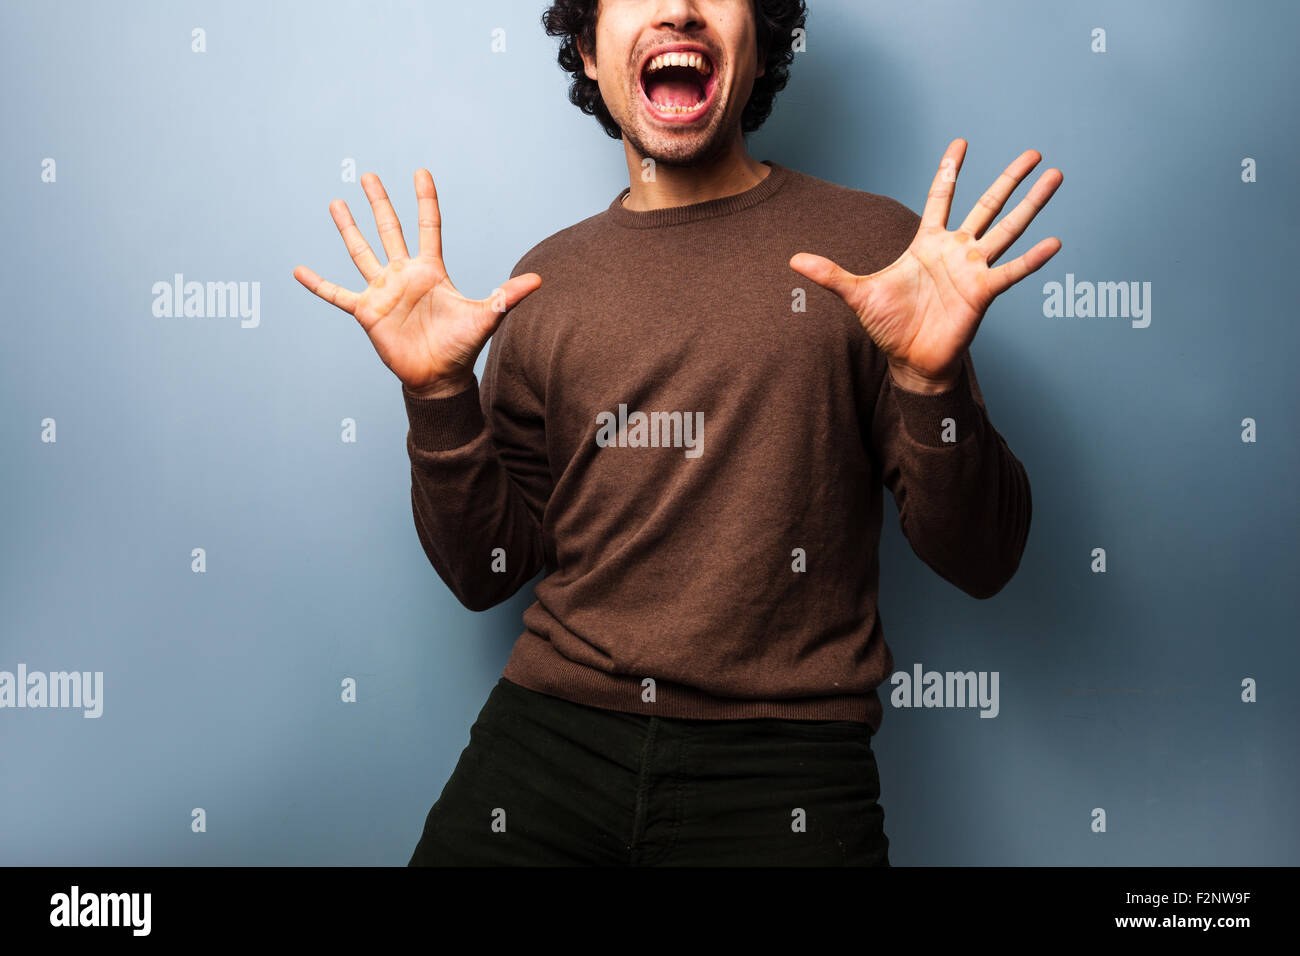 an excited young man holds up his jazz hands, smiling mouth wide open. Stock Photo